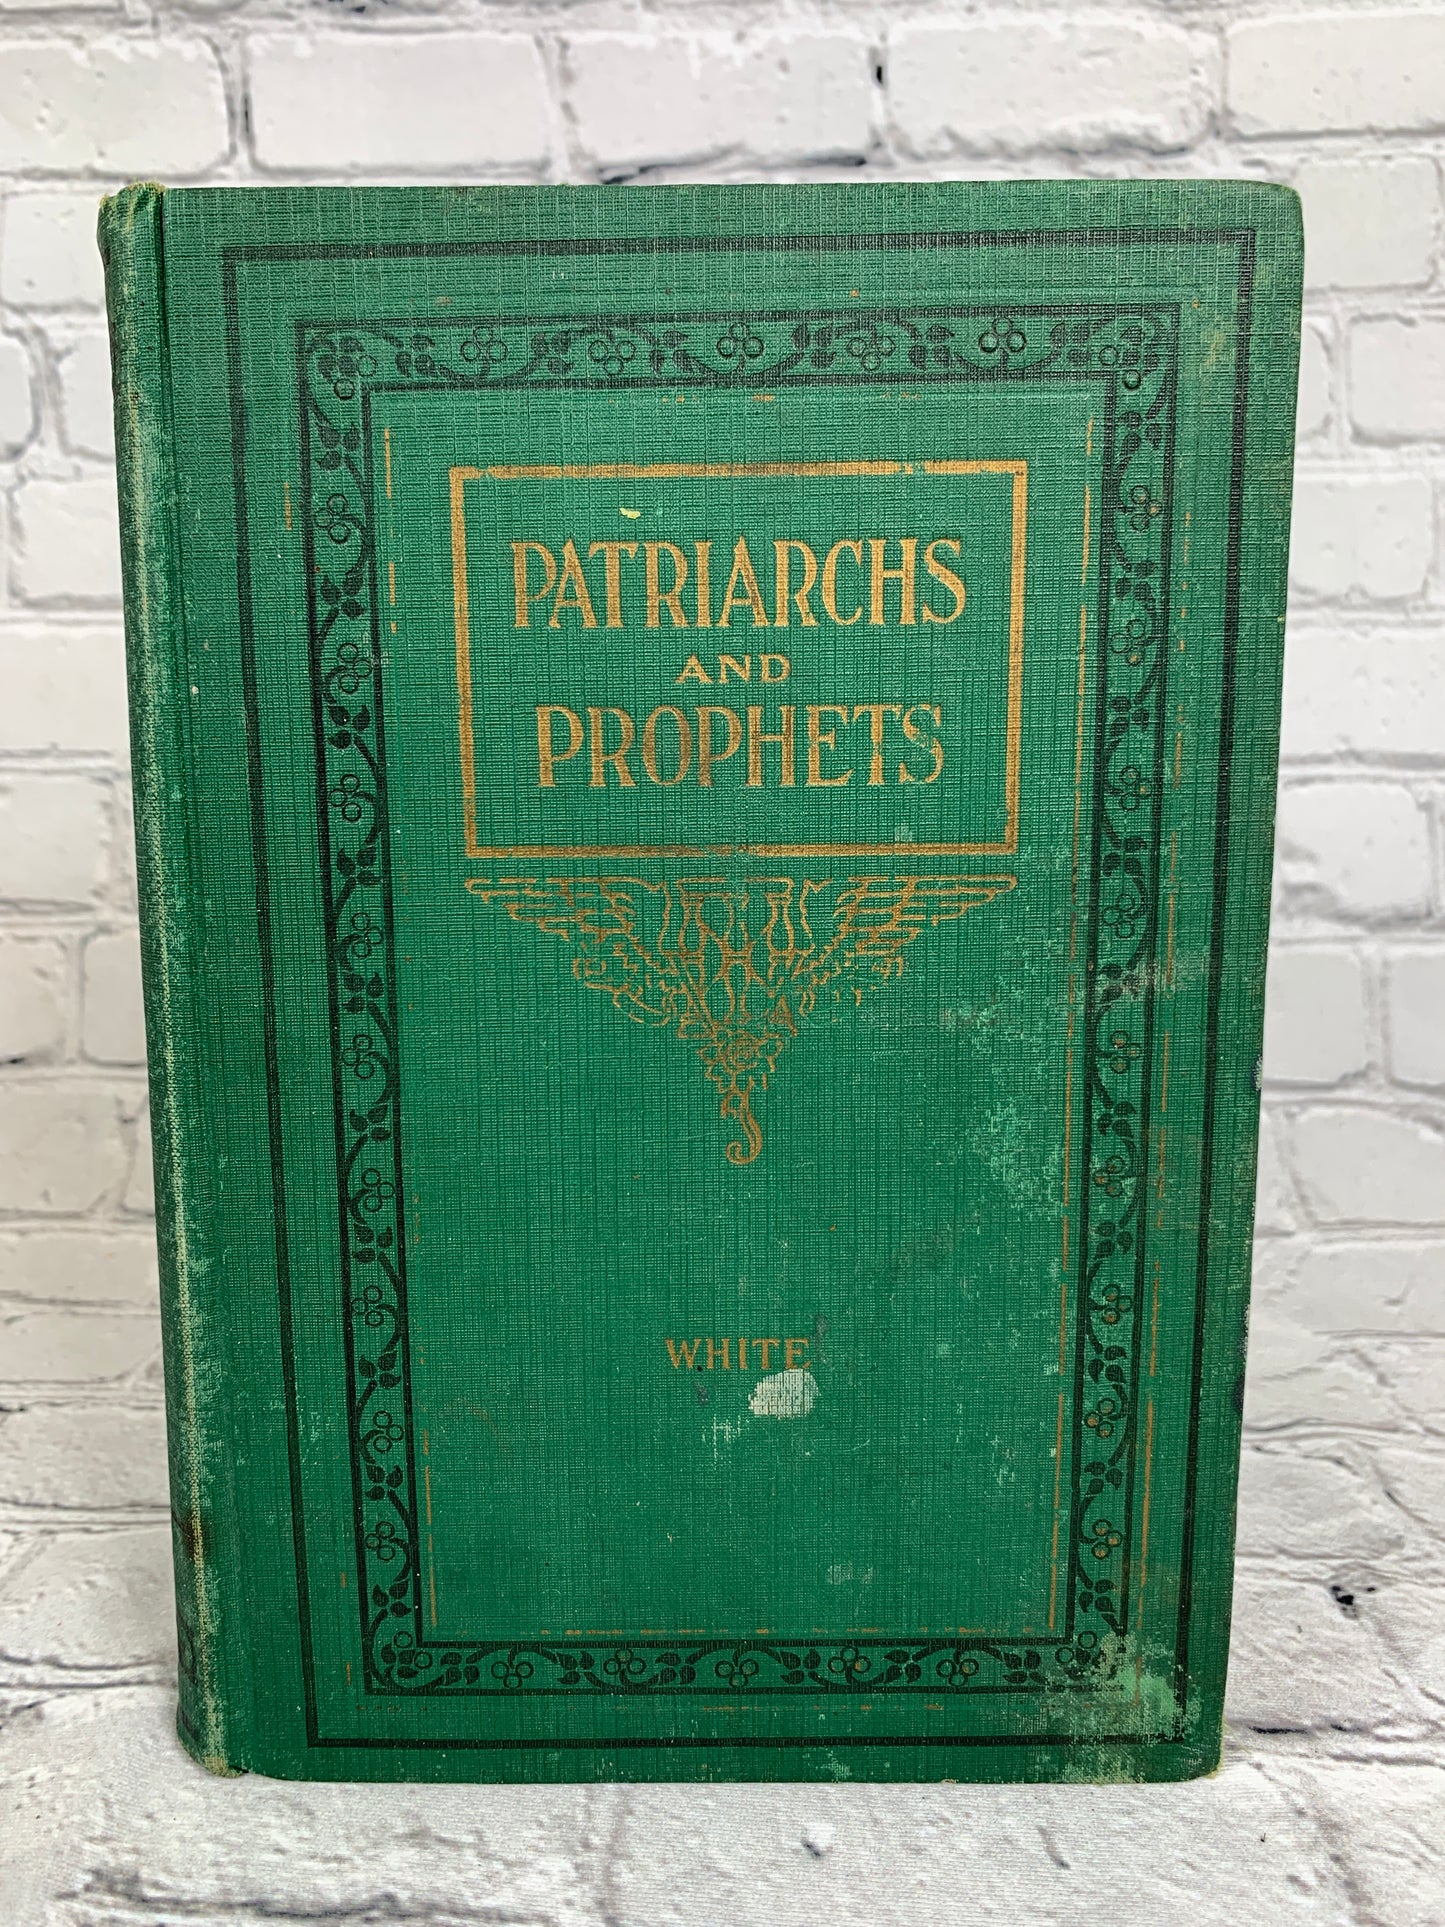 Patriarchs and Prophets by Ellen G. White [1927]